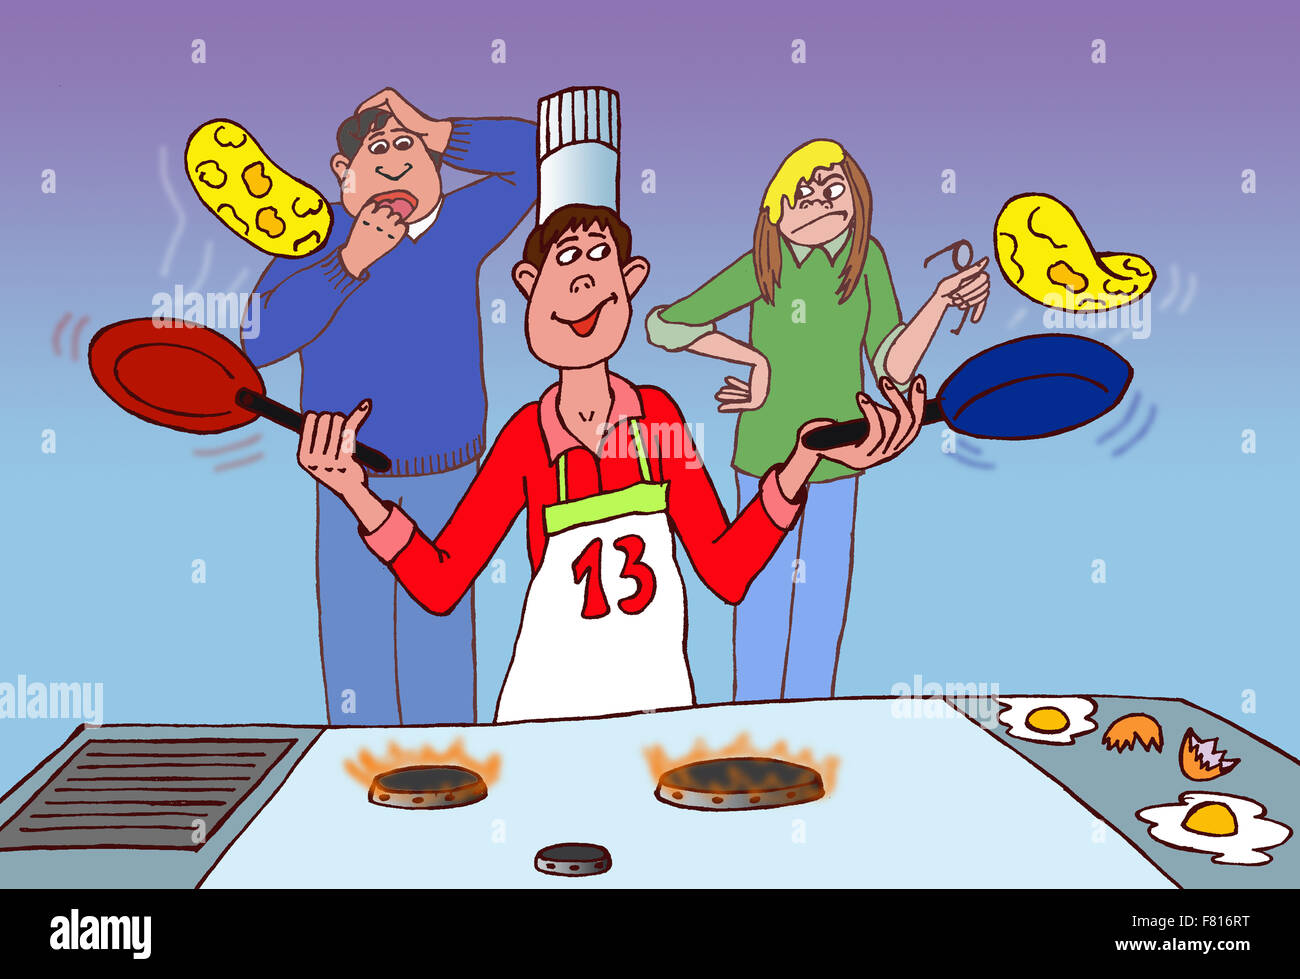 Young cook in the kitchen, making omelets next to his astonished parents. Illustration. Stock Photo